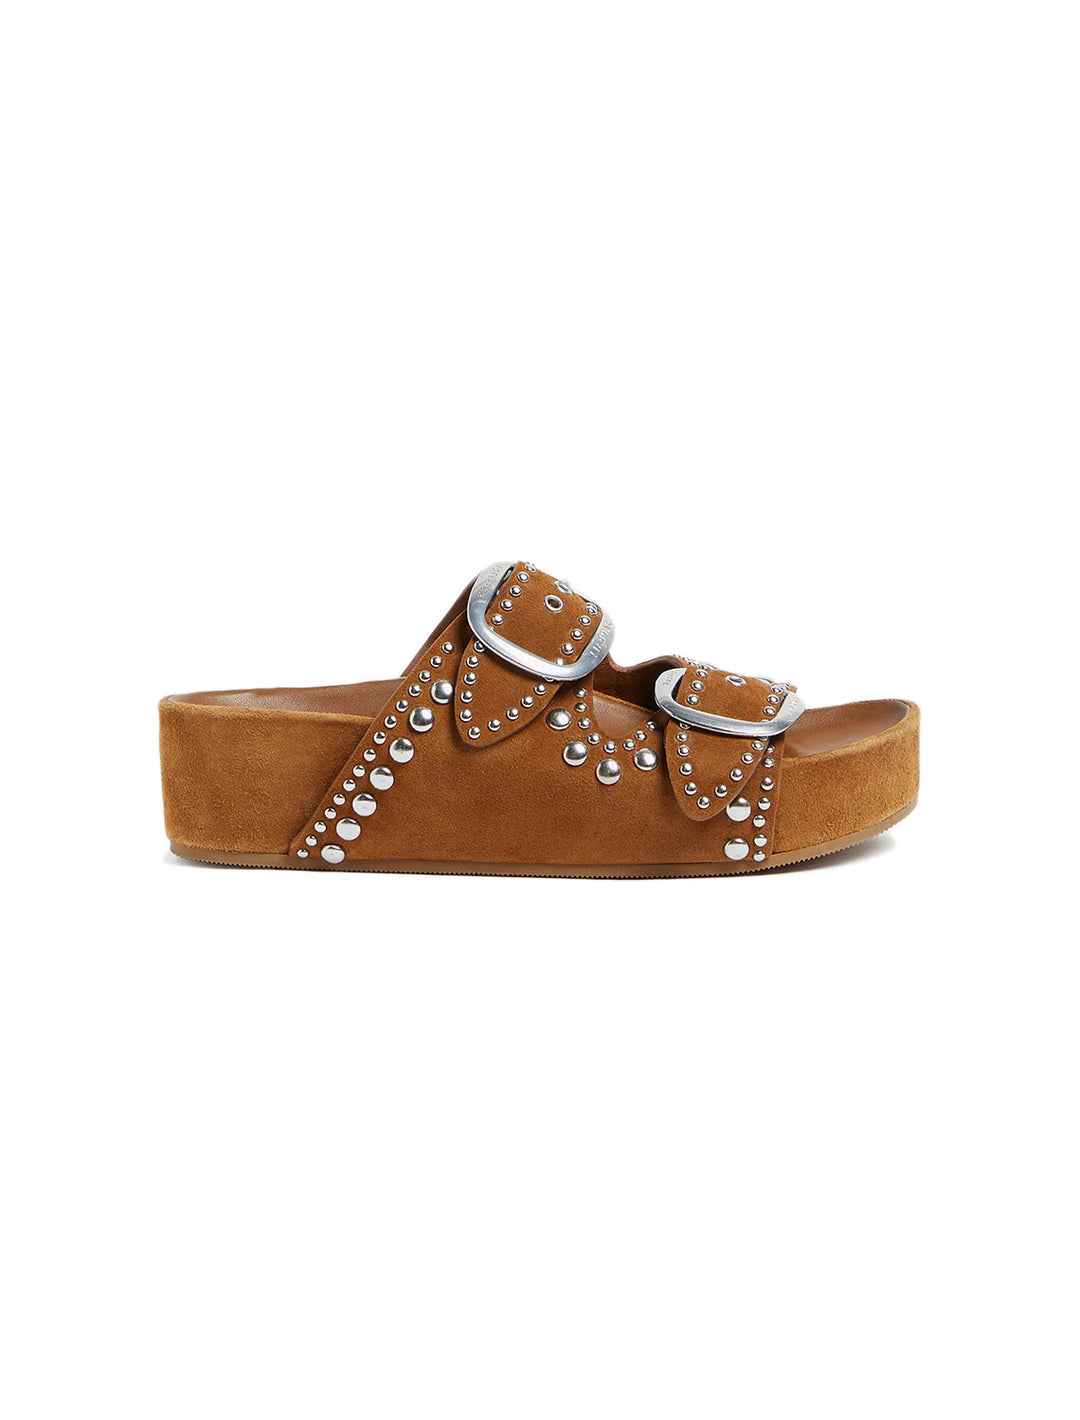 Side view of Loeffler Randall's jack two band sandal with studs.